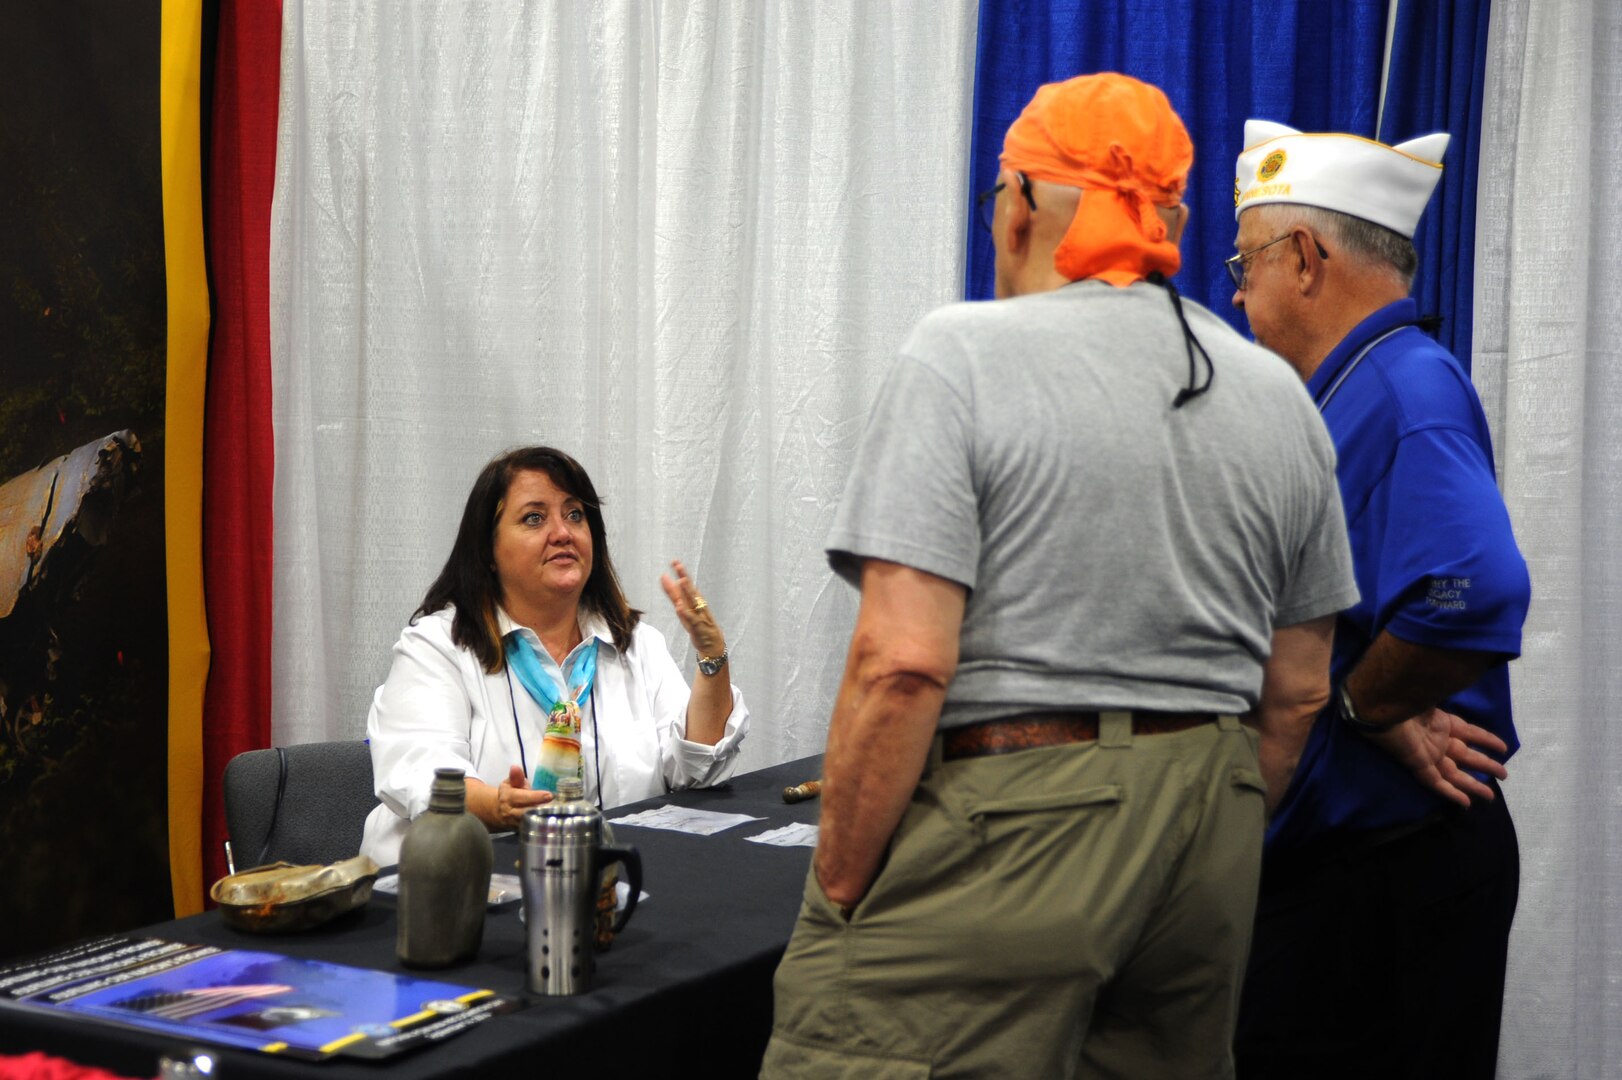 Linda Read, the Defense POW/MIA Accounting Agency (DPAA) chief of community relations and protocol, speaks to legionnaires at the American Legion’s 98th National Convention in Cincinnati, Aug. 26, 2016. DPAA attended the convention to answer questions and ensure members that DPAA’s mission continues; to provide the fullest possible accounting for our missing personnel to their families and the nation. (DoD photo by Staff Sgt. Jocelyn Ford/USAF)